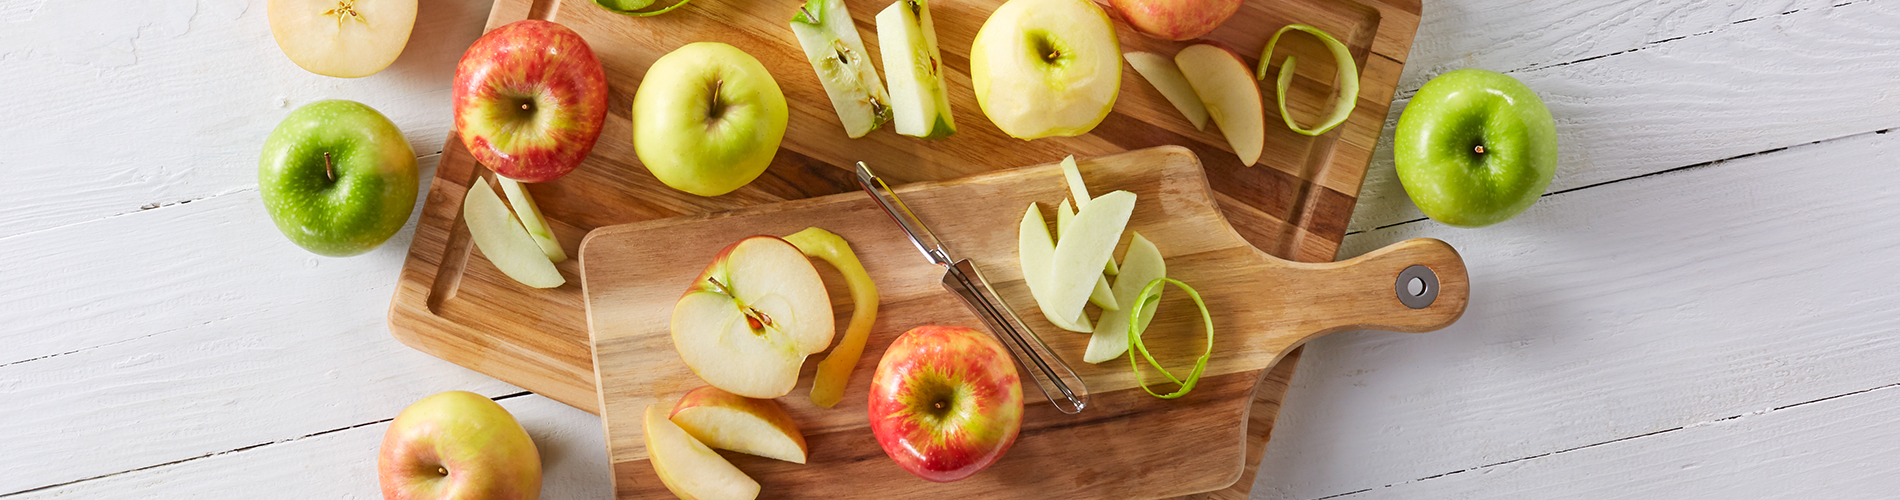 How to peel, core and chop apples